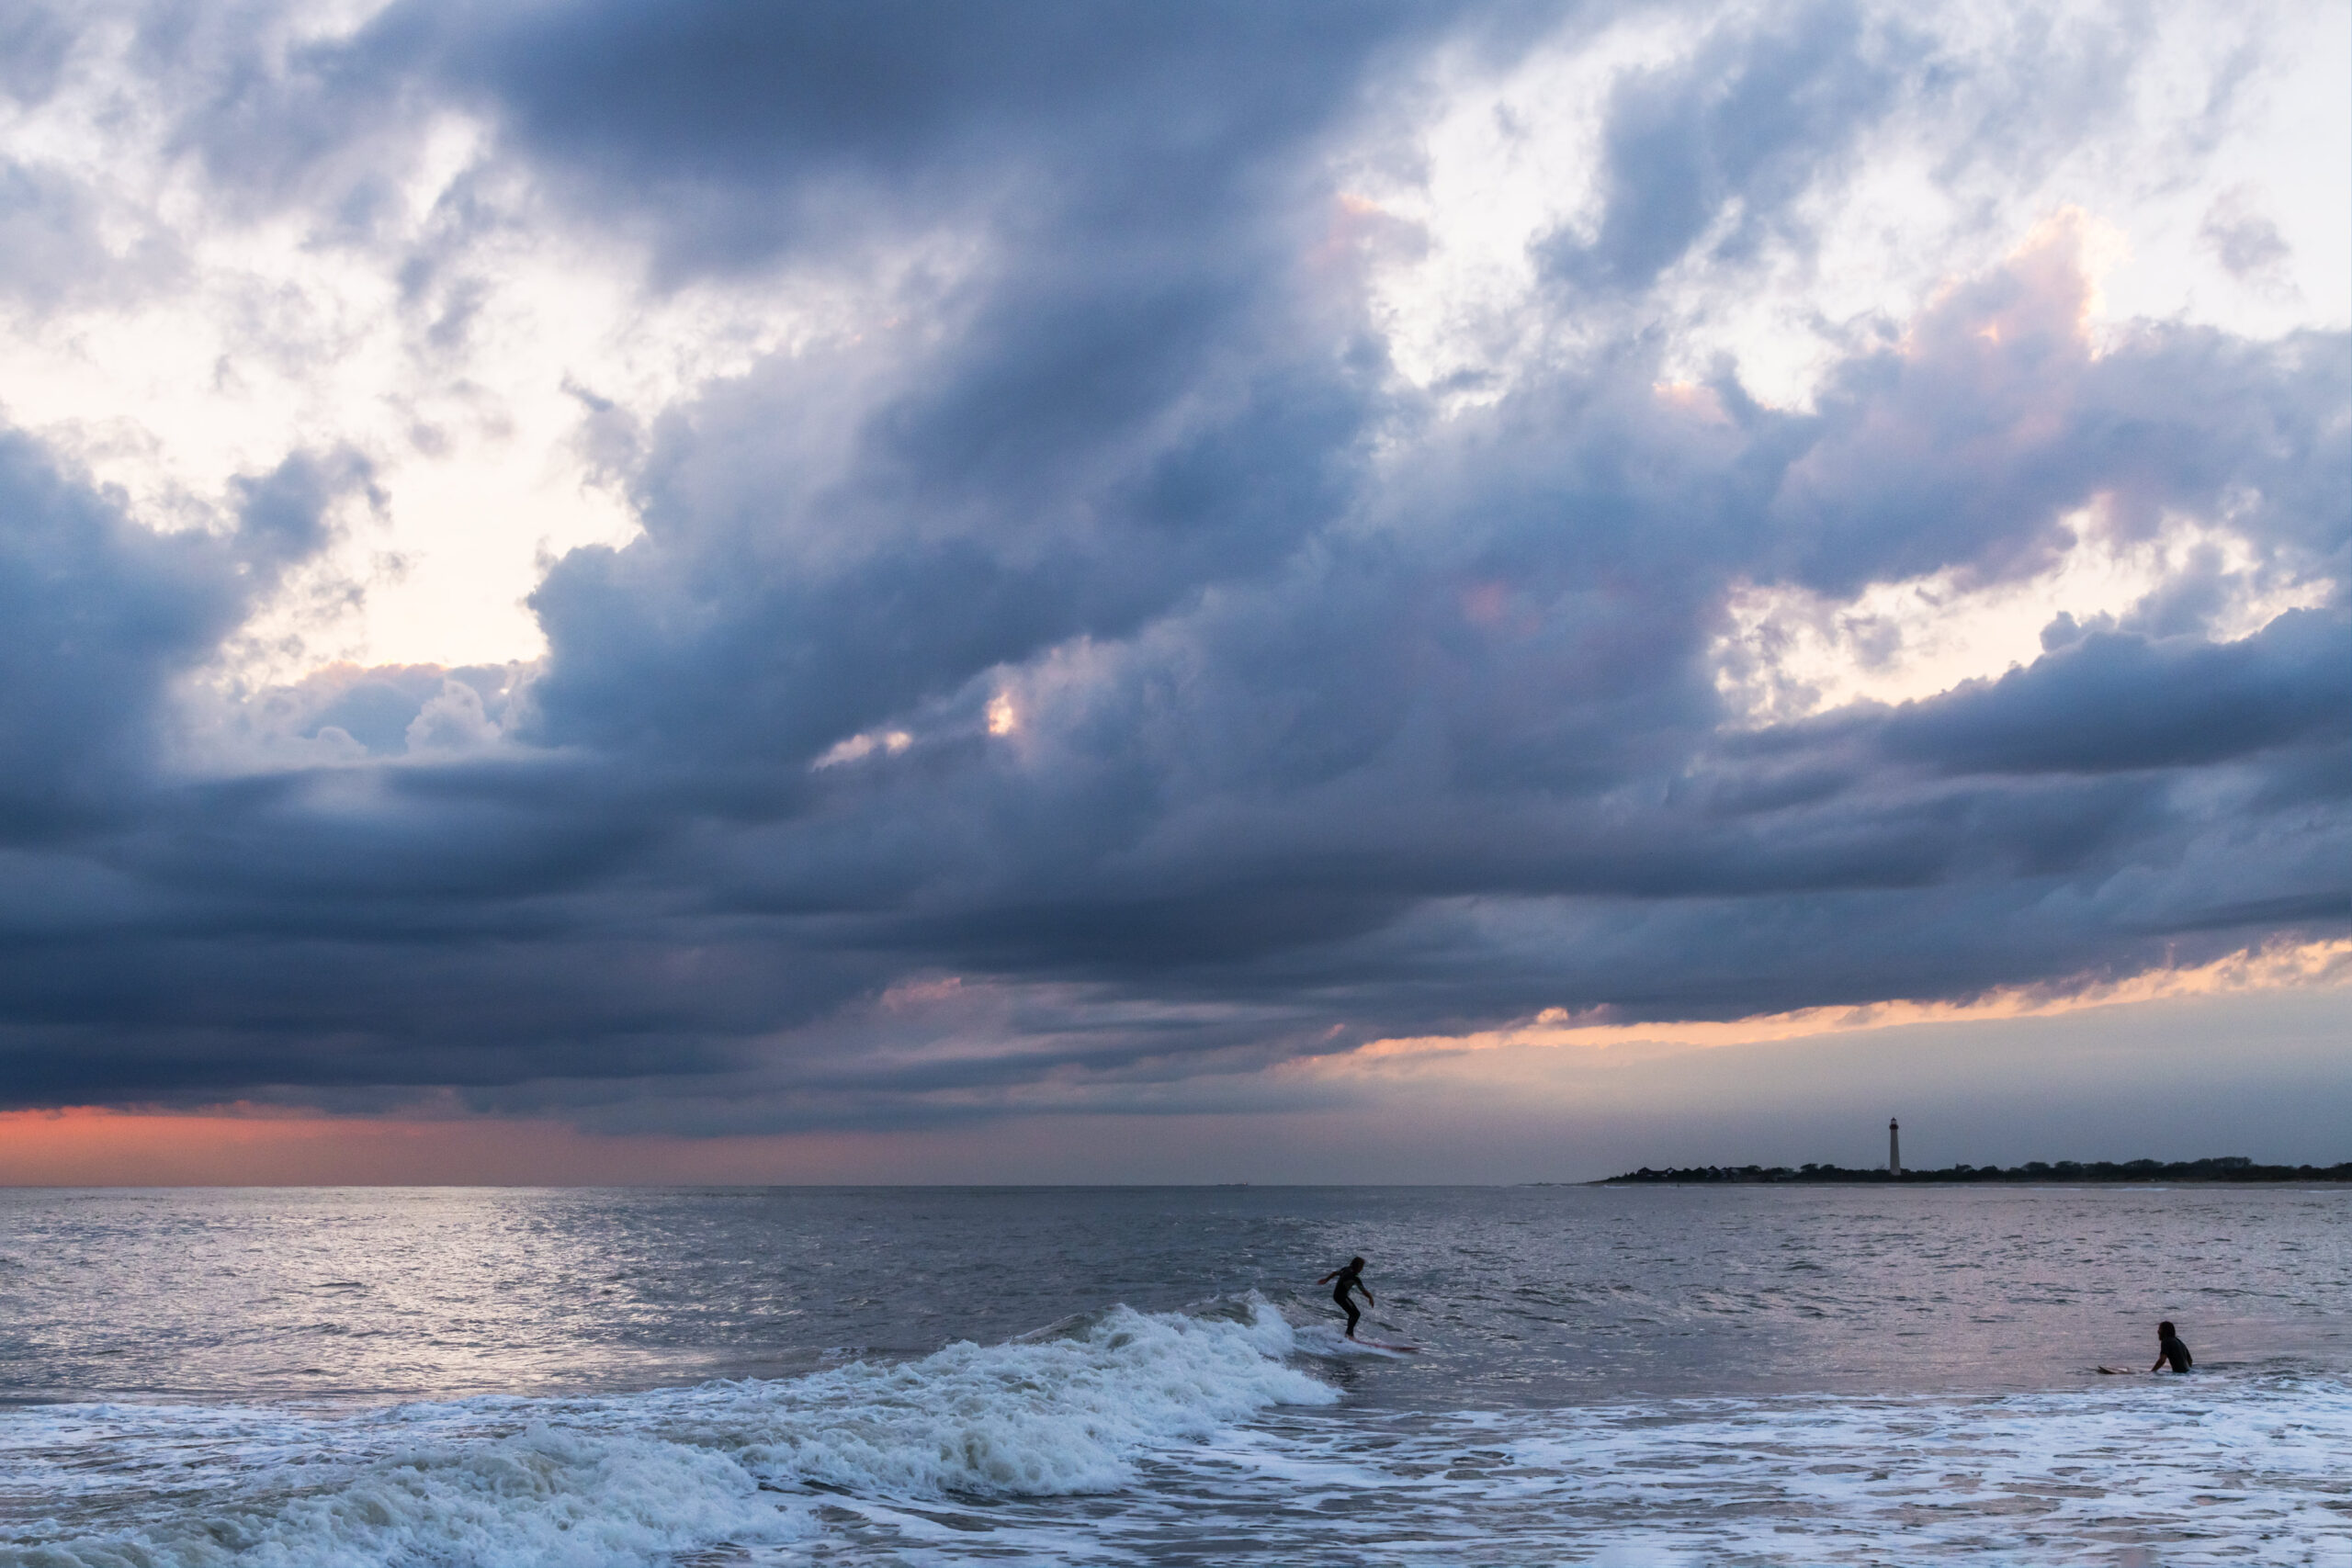 Blue puffy clouds in the sky at sunset with the Cape May Lighthouse in the distance, some pink sky at the horizon, and two people surfing in the ocean